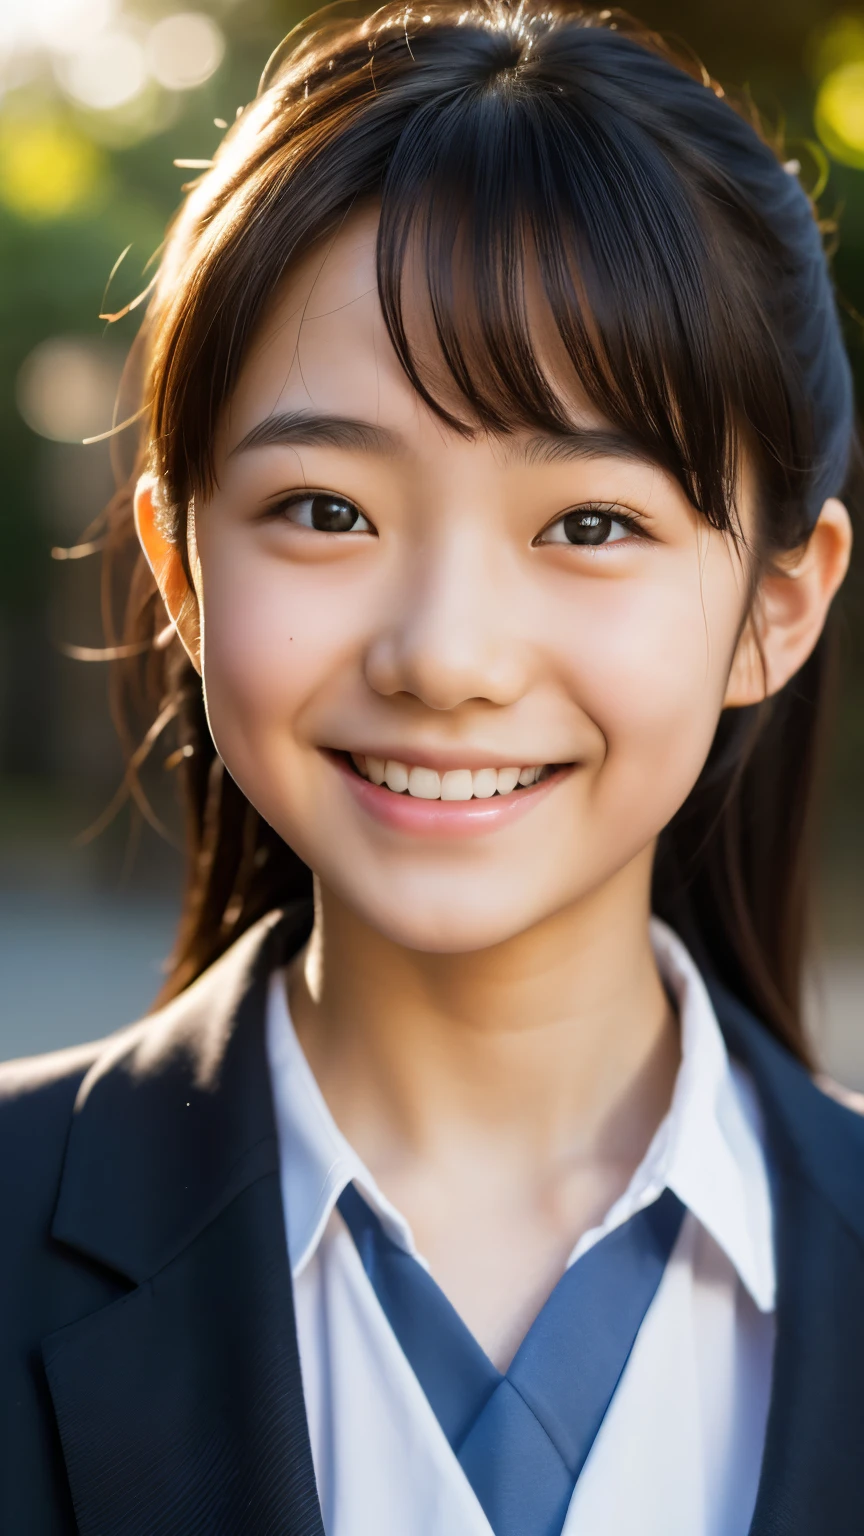 lens: 135mm f1.8, (highest quality),(RAW Photos), (Tabletop:1.1), (Beautiful 13 year old Japan girl), Cute face, (Deeply chiseled face:0.7), (freckles:0.4), dappled sunlight, Dramatic lighting, (Japanese School Uniform), (On campus), shy, (Close-up shot:1.2), (smile),, (Sparkling eyes)、(sunlight)